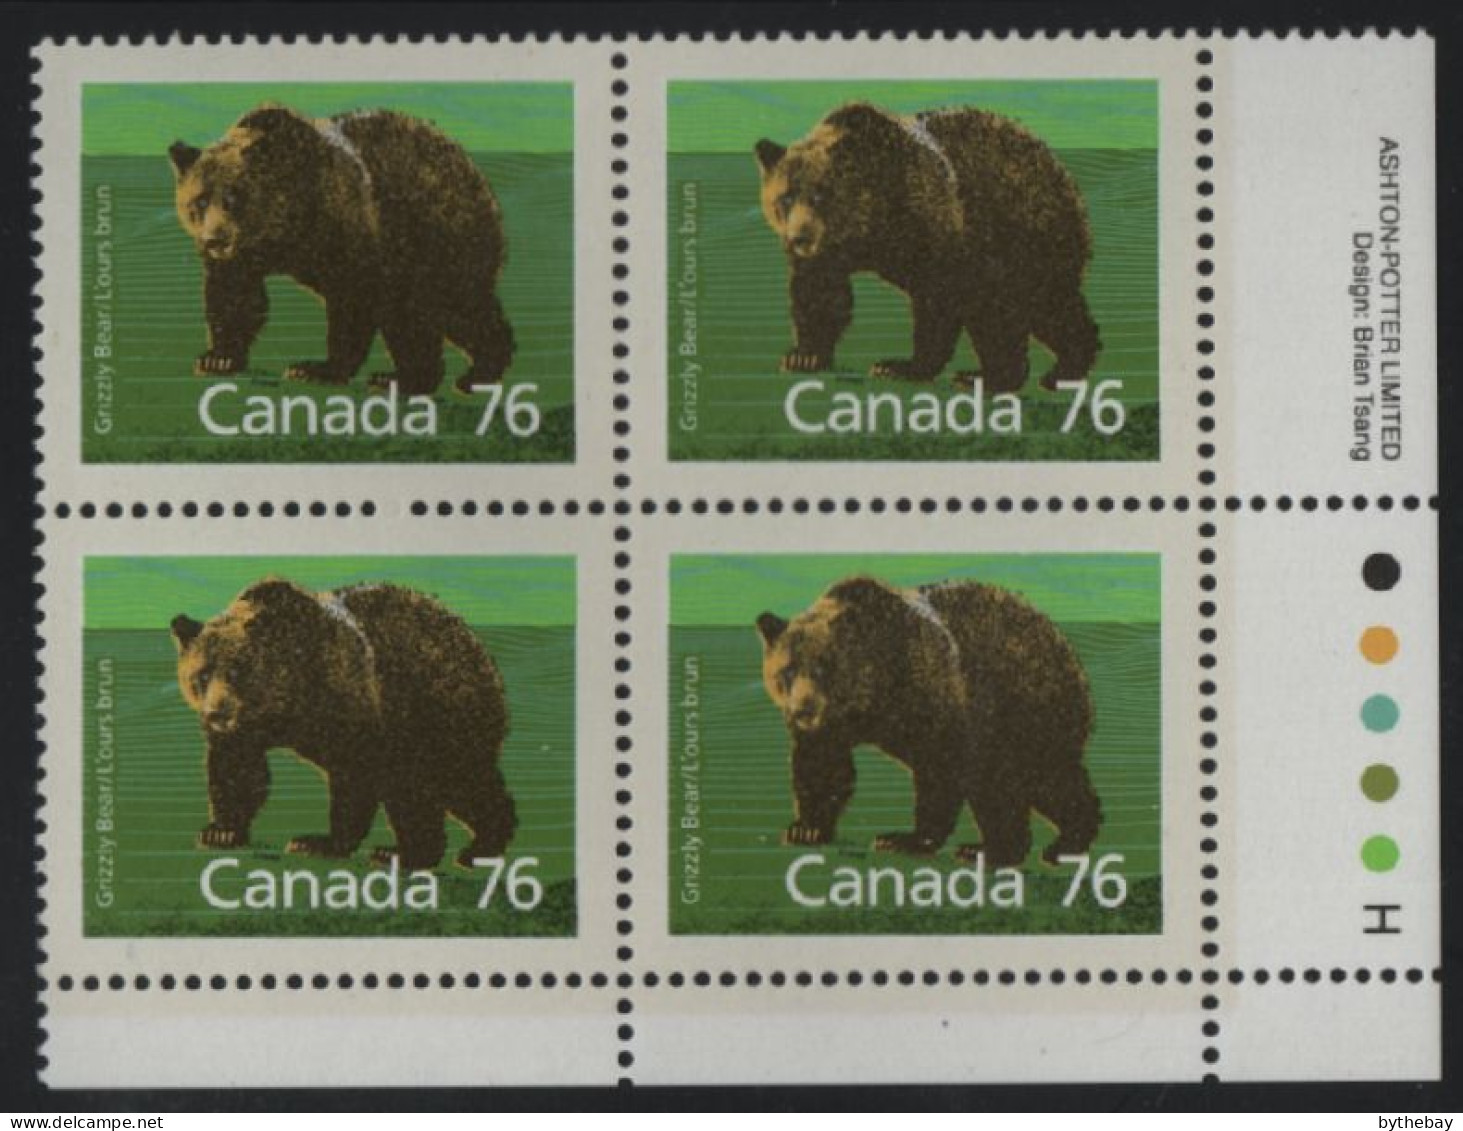 Canada 1988-92 MNH Sc 1178 76c Grizzly Bear LR Plate Block - Plate Number & Inscriptions